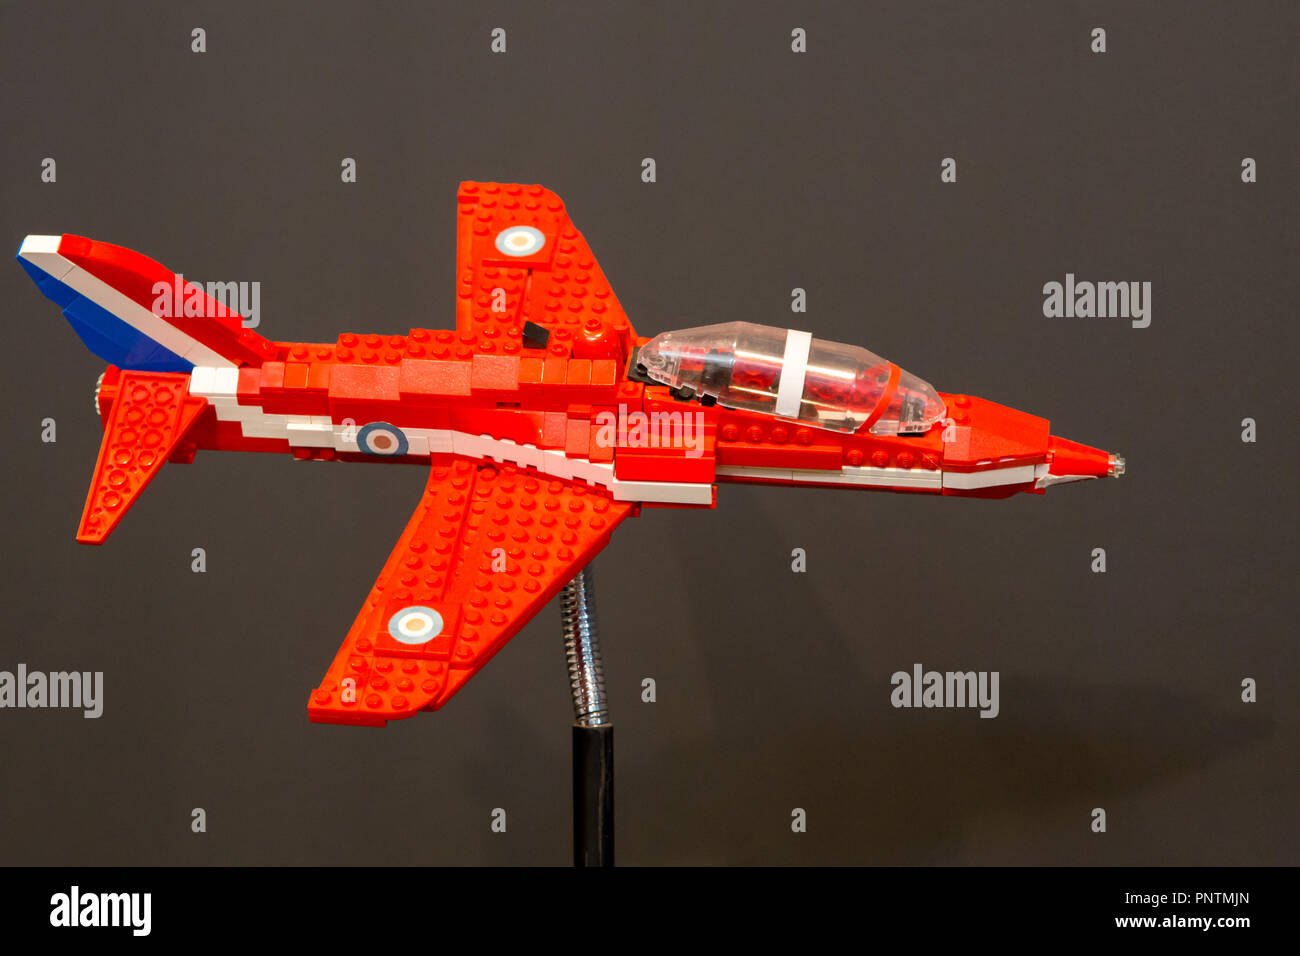 Lego model of a Red Arrows plane in the science museum in the City of Arts  and Sciences in Valencia, Spain Stock Photo - Alamy